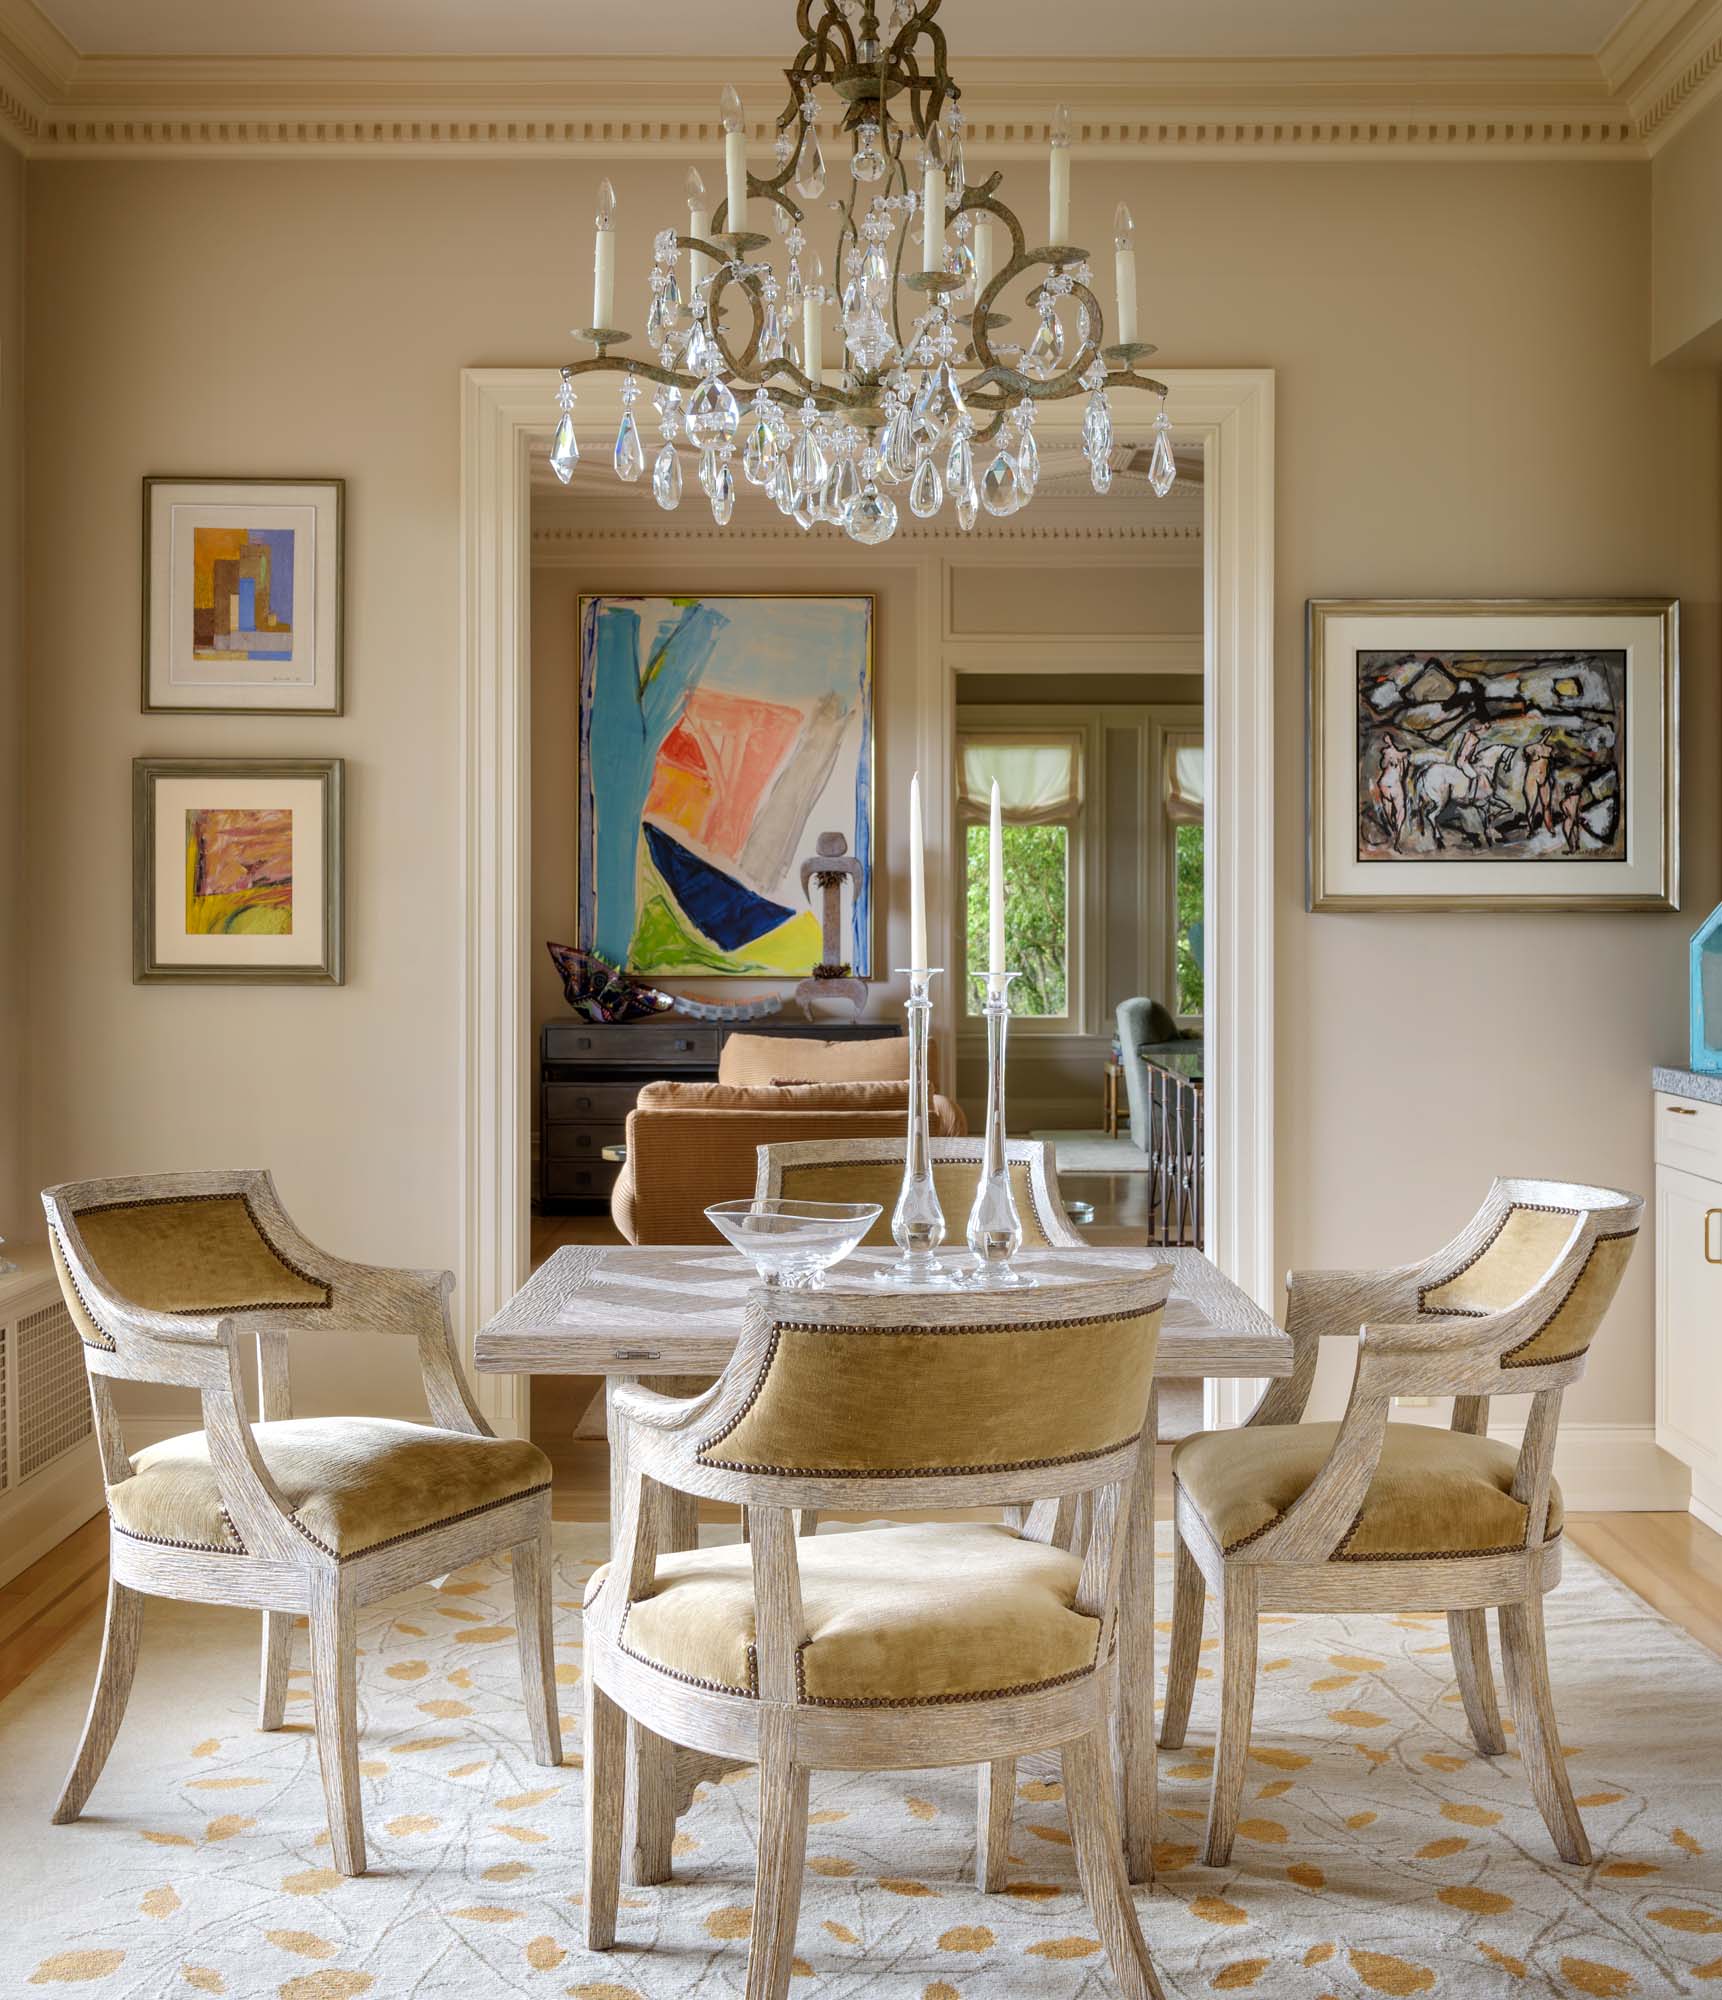 table for four with candlesticks, chandelier above, cushioned chairs around, and artwork on the walls